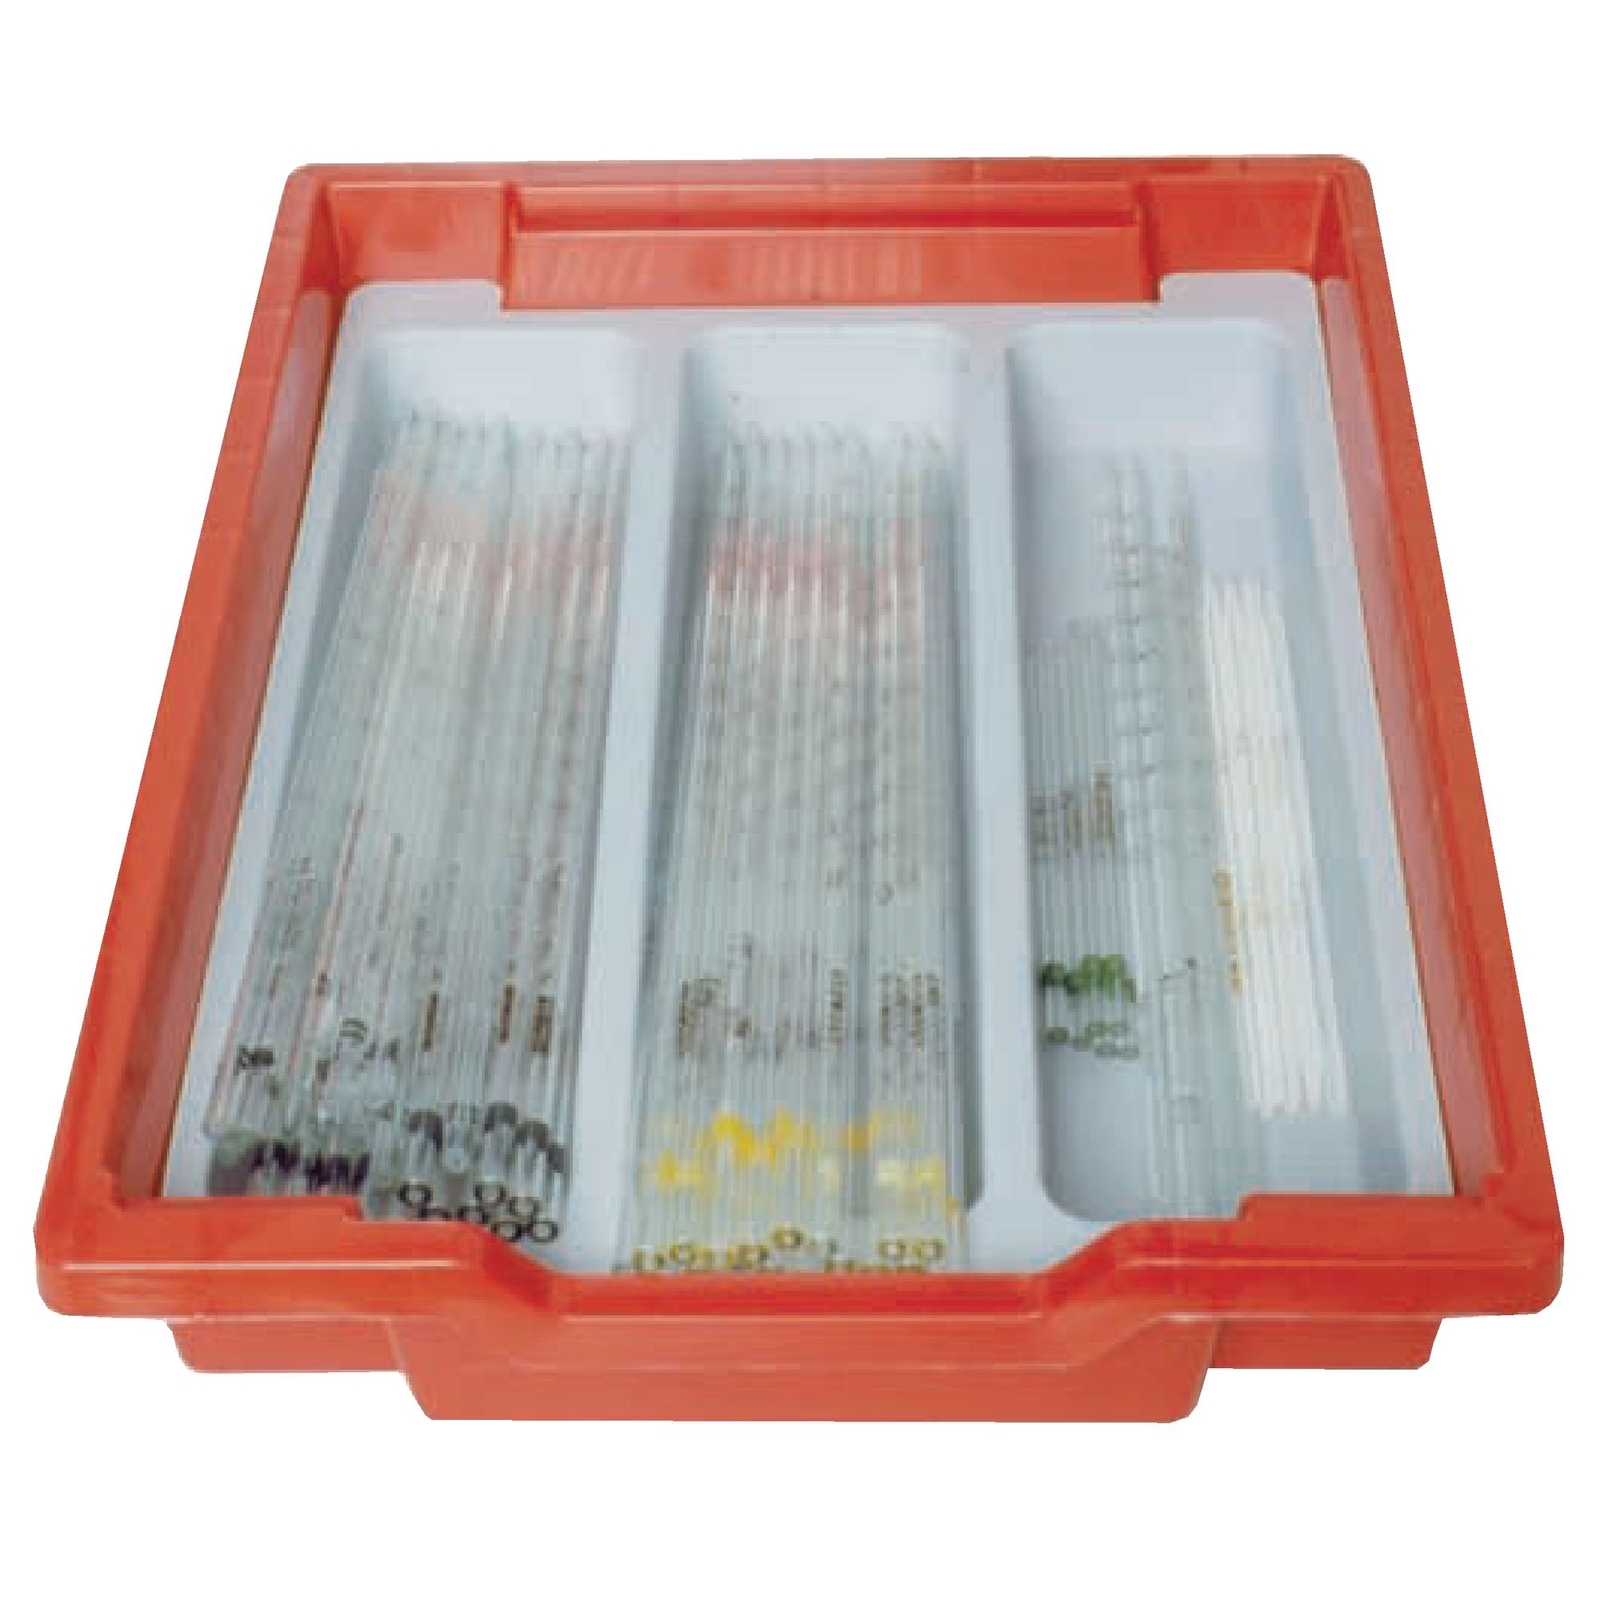 Gratnell Plastic Dividers for Shallow Trays - 3 Compartments - Pack of 6